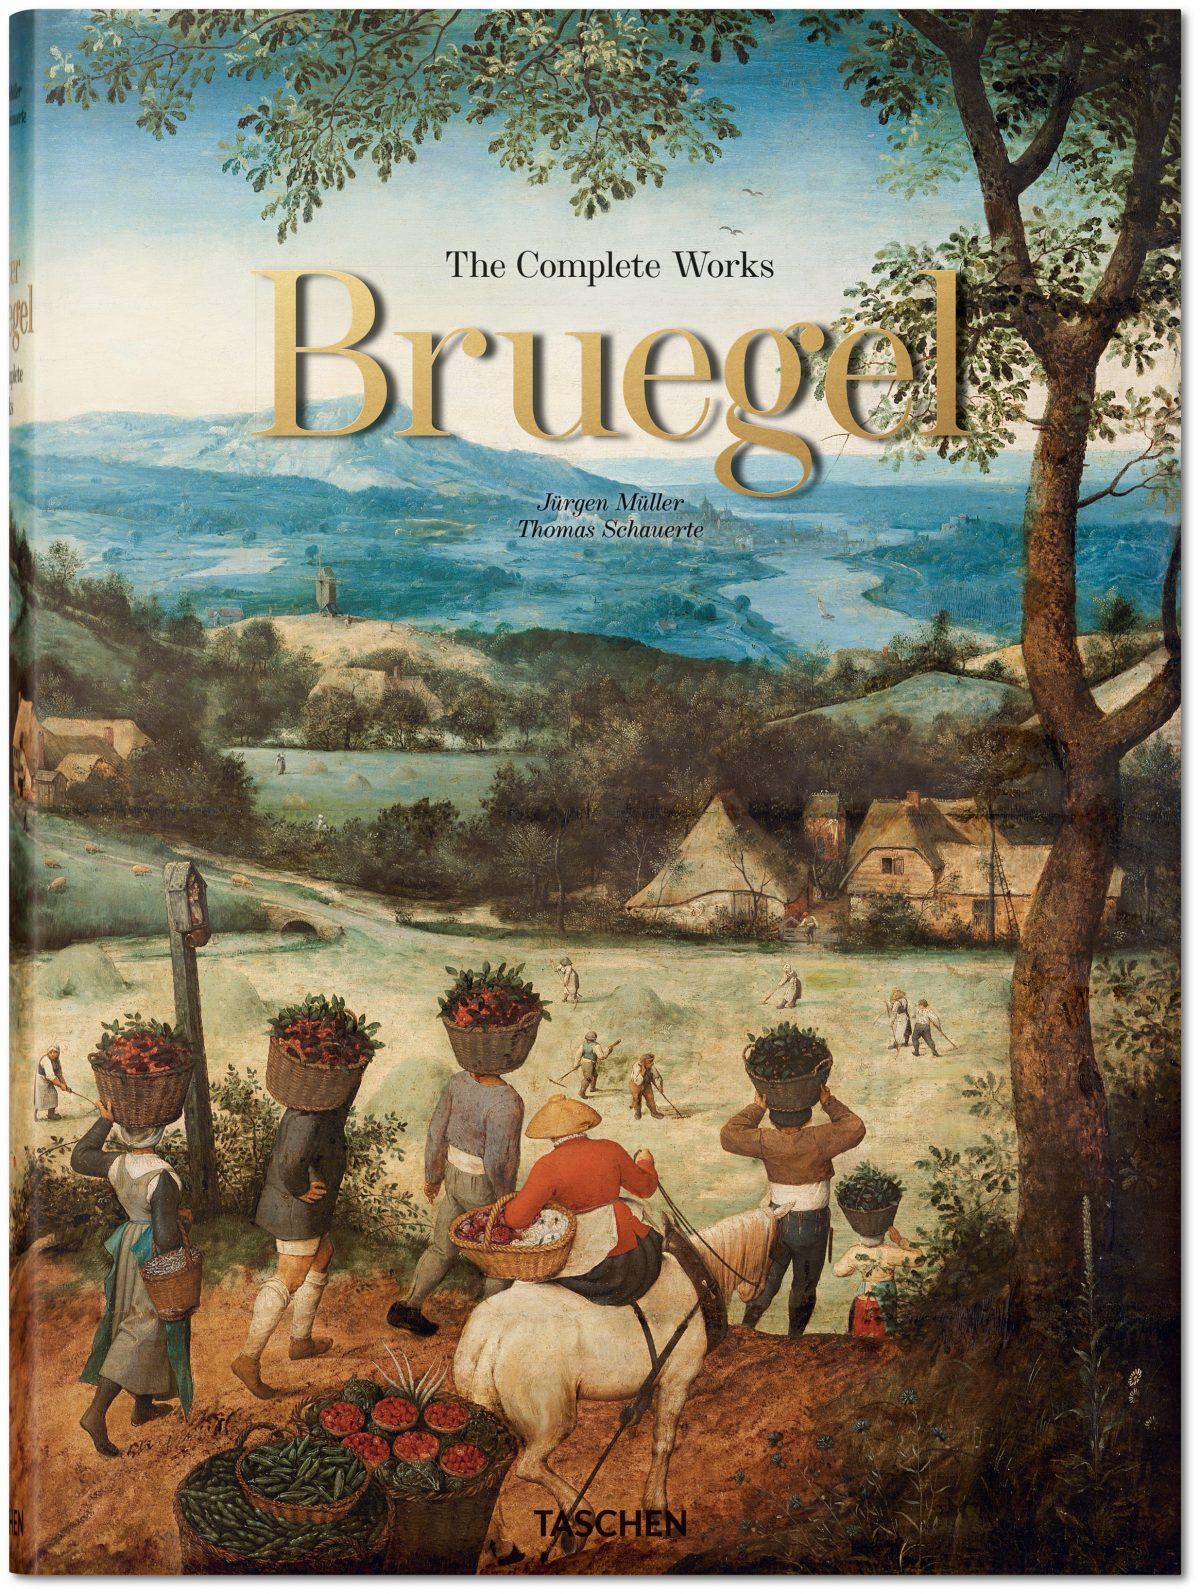 Cover of the English edition. (Taschen)